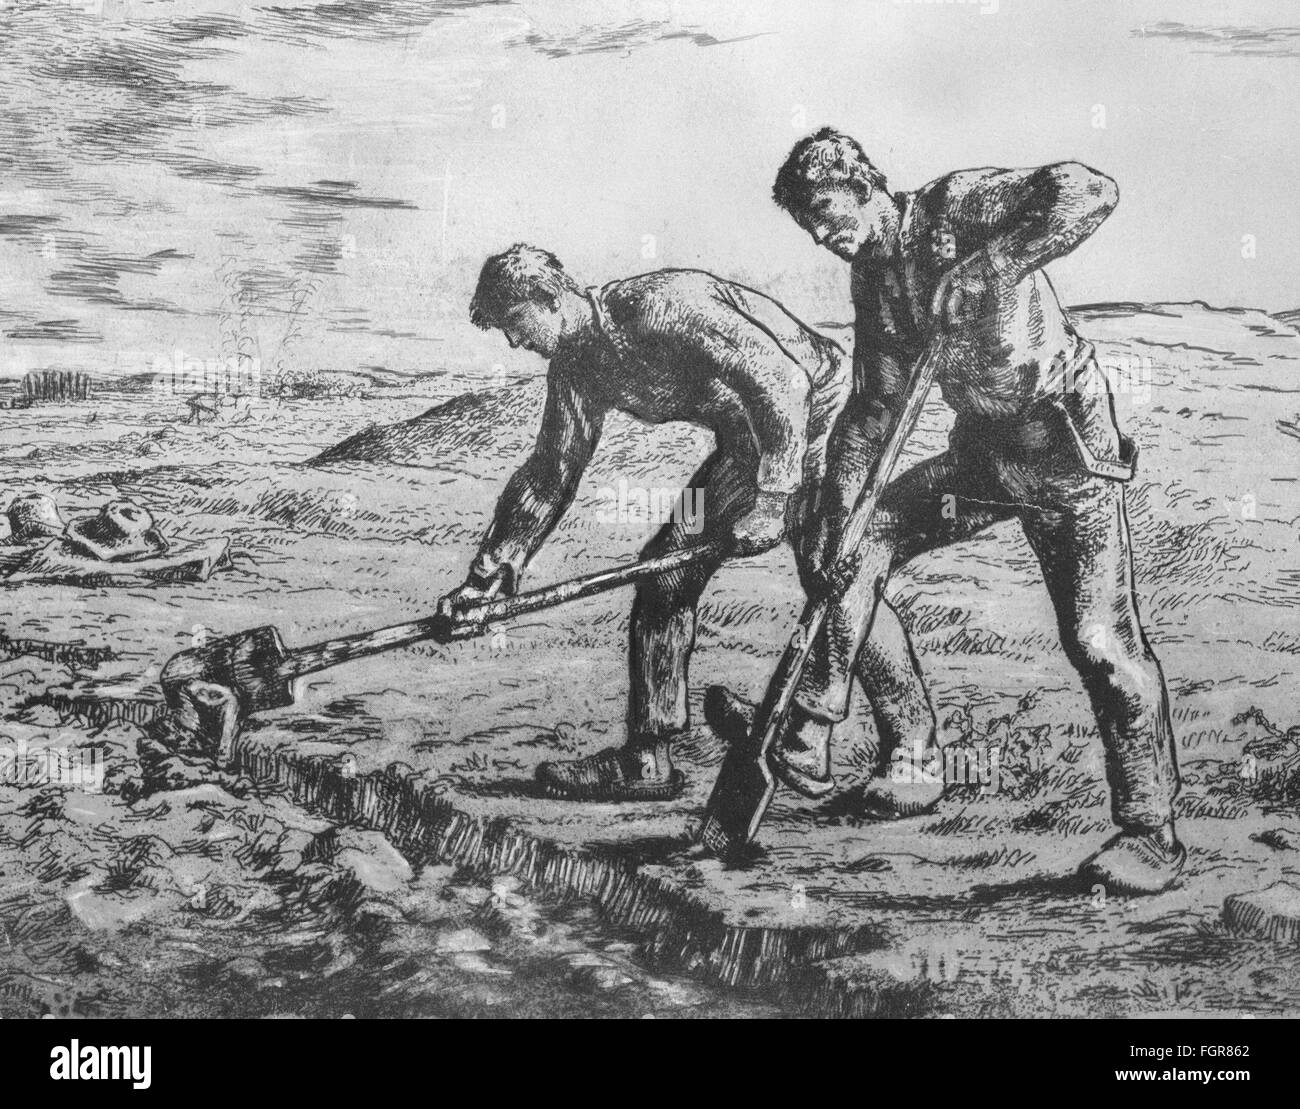 agriculture, farm labour, fields, "Two Men with Spades" after painting by Jean-Francois Millet (1814 - 1875), 1855 / 1856, drawing, 19th century, Additional-Rights-Clearences-Not Available Stock Photo